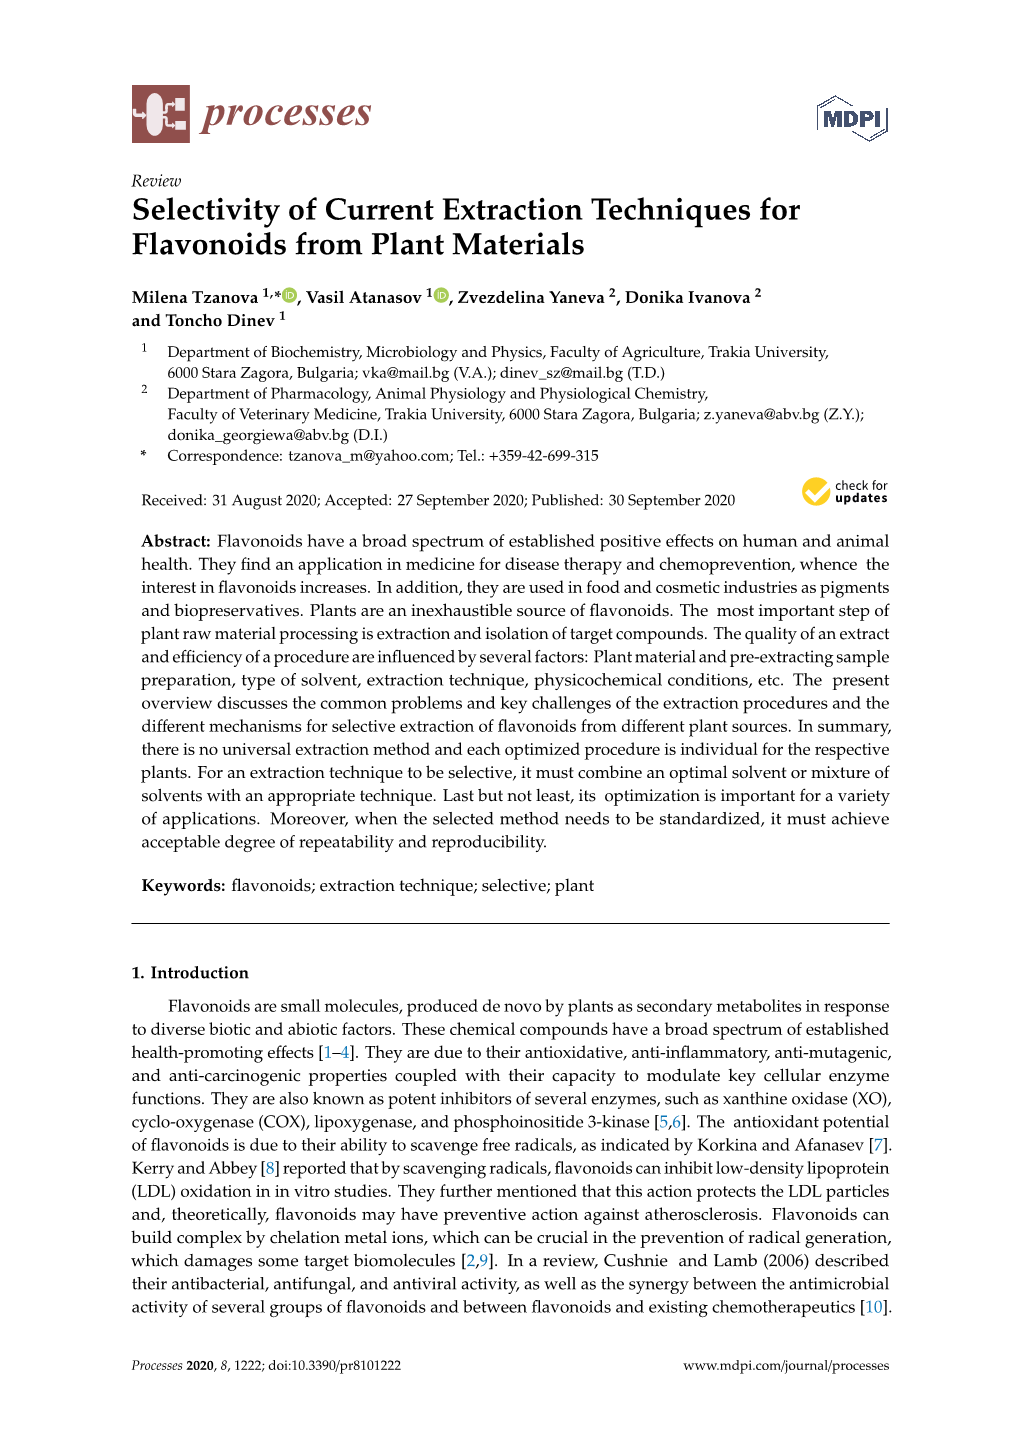 Selectivity of Current Extraction Techniques for Flavonoids from Plant Materials